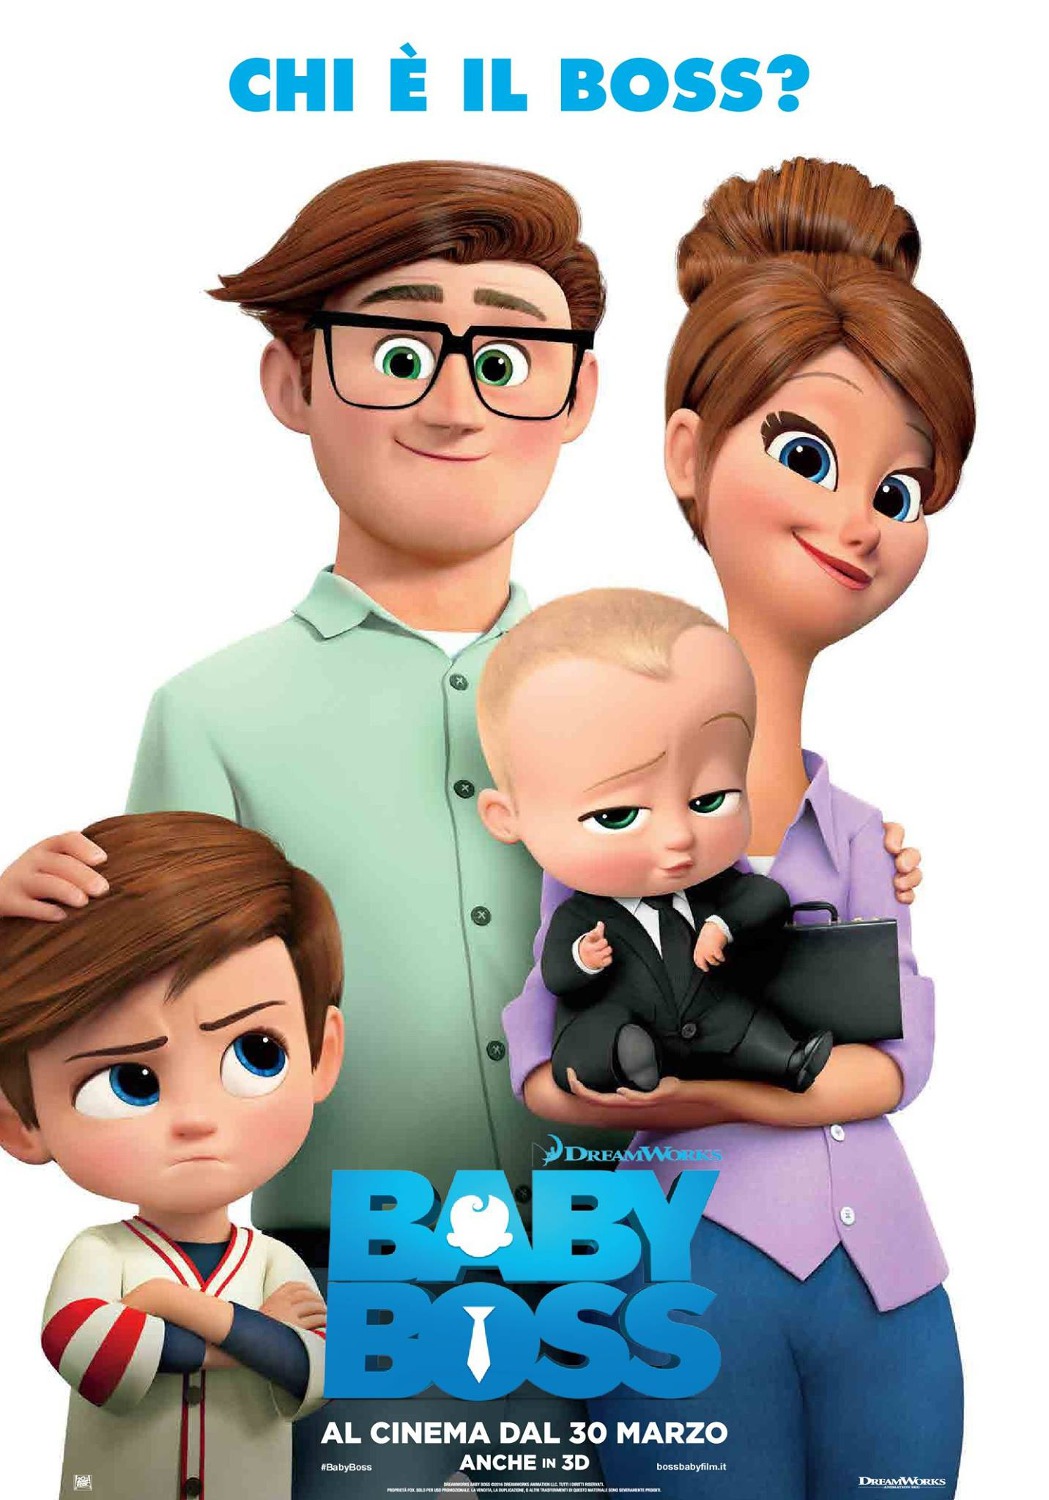 Extra Large Movie Poster Image for The Boss Baby (#7 of 7)